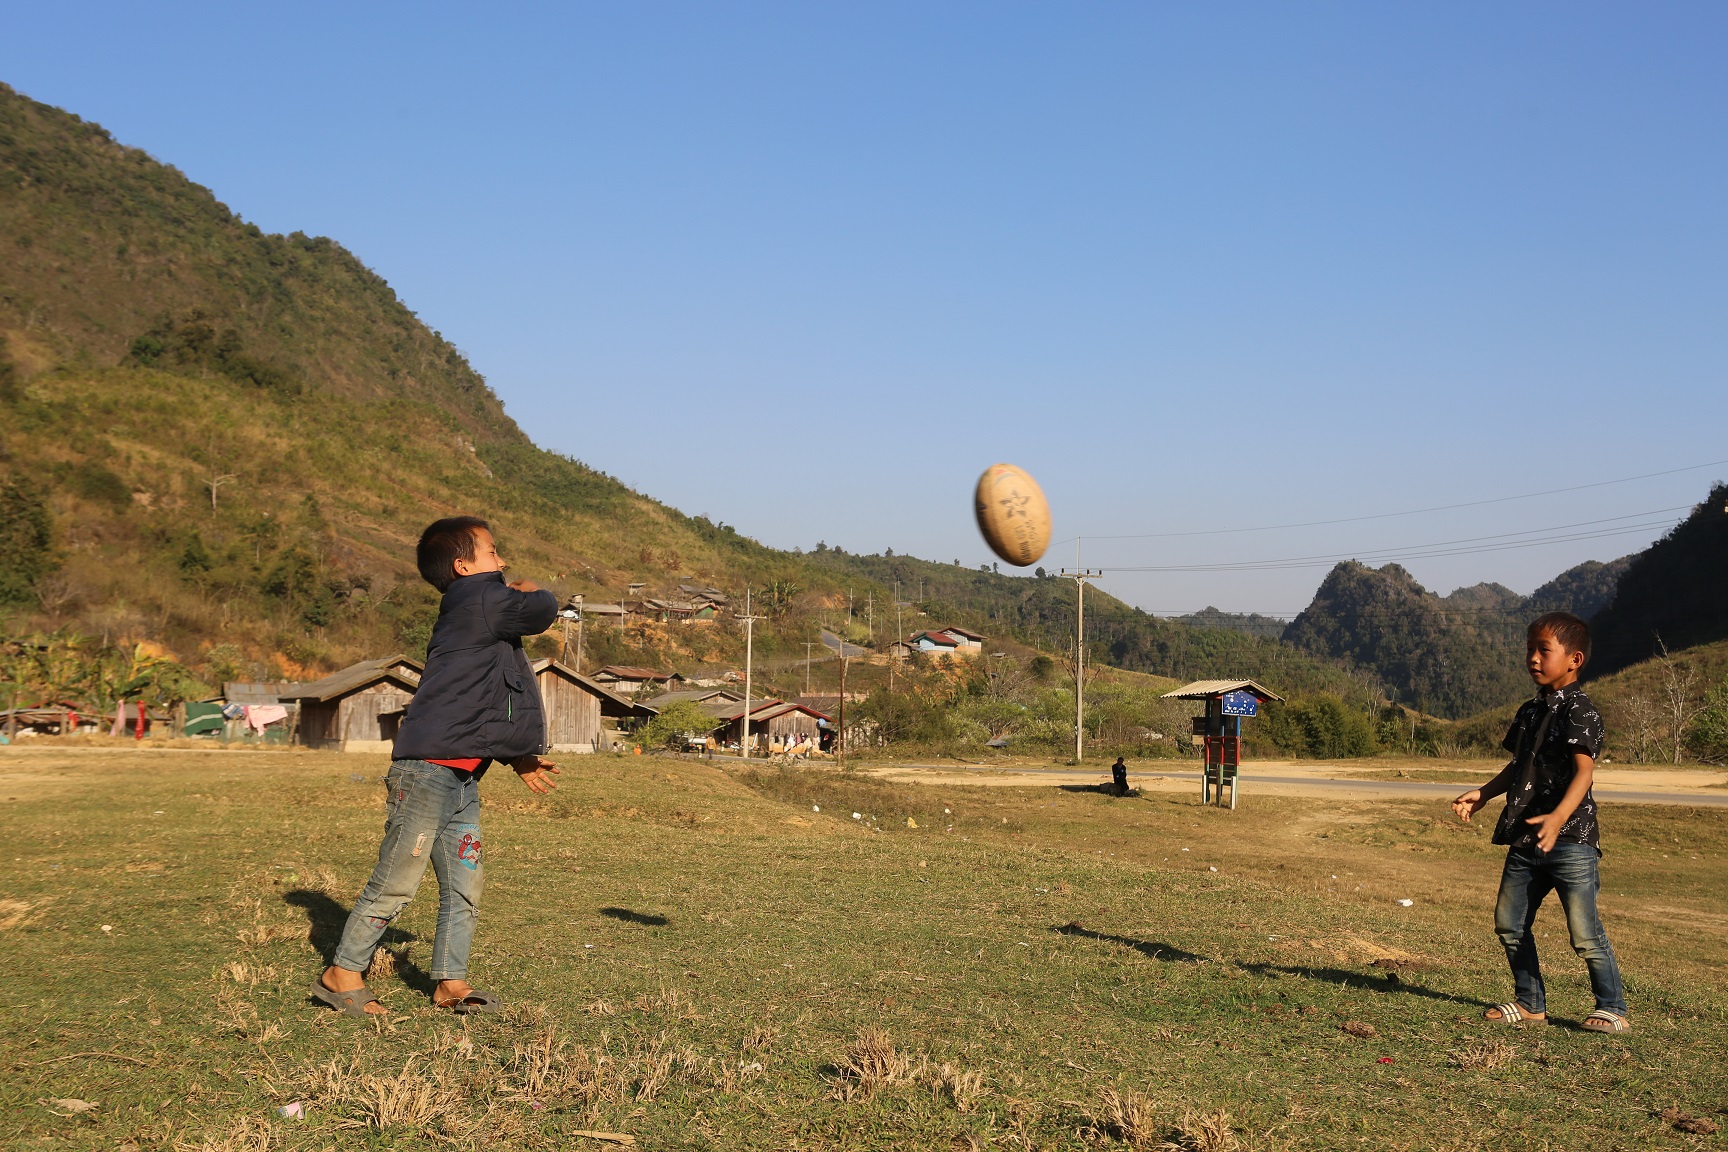 Two boys in a rural area throw a rugby ball to each other 